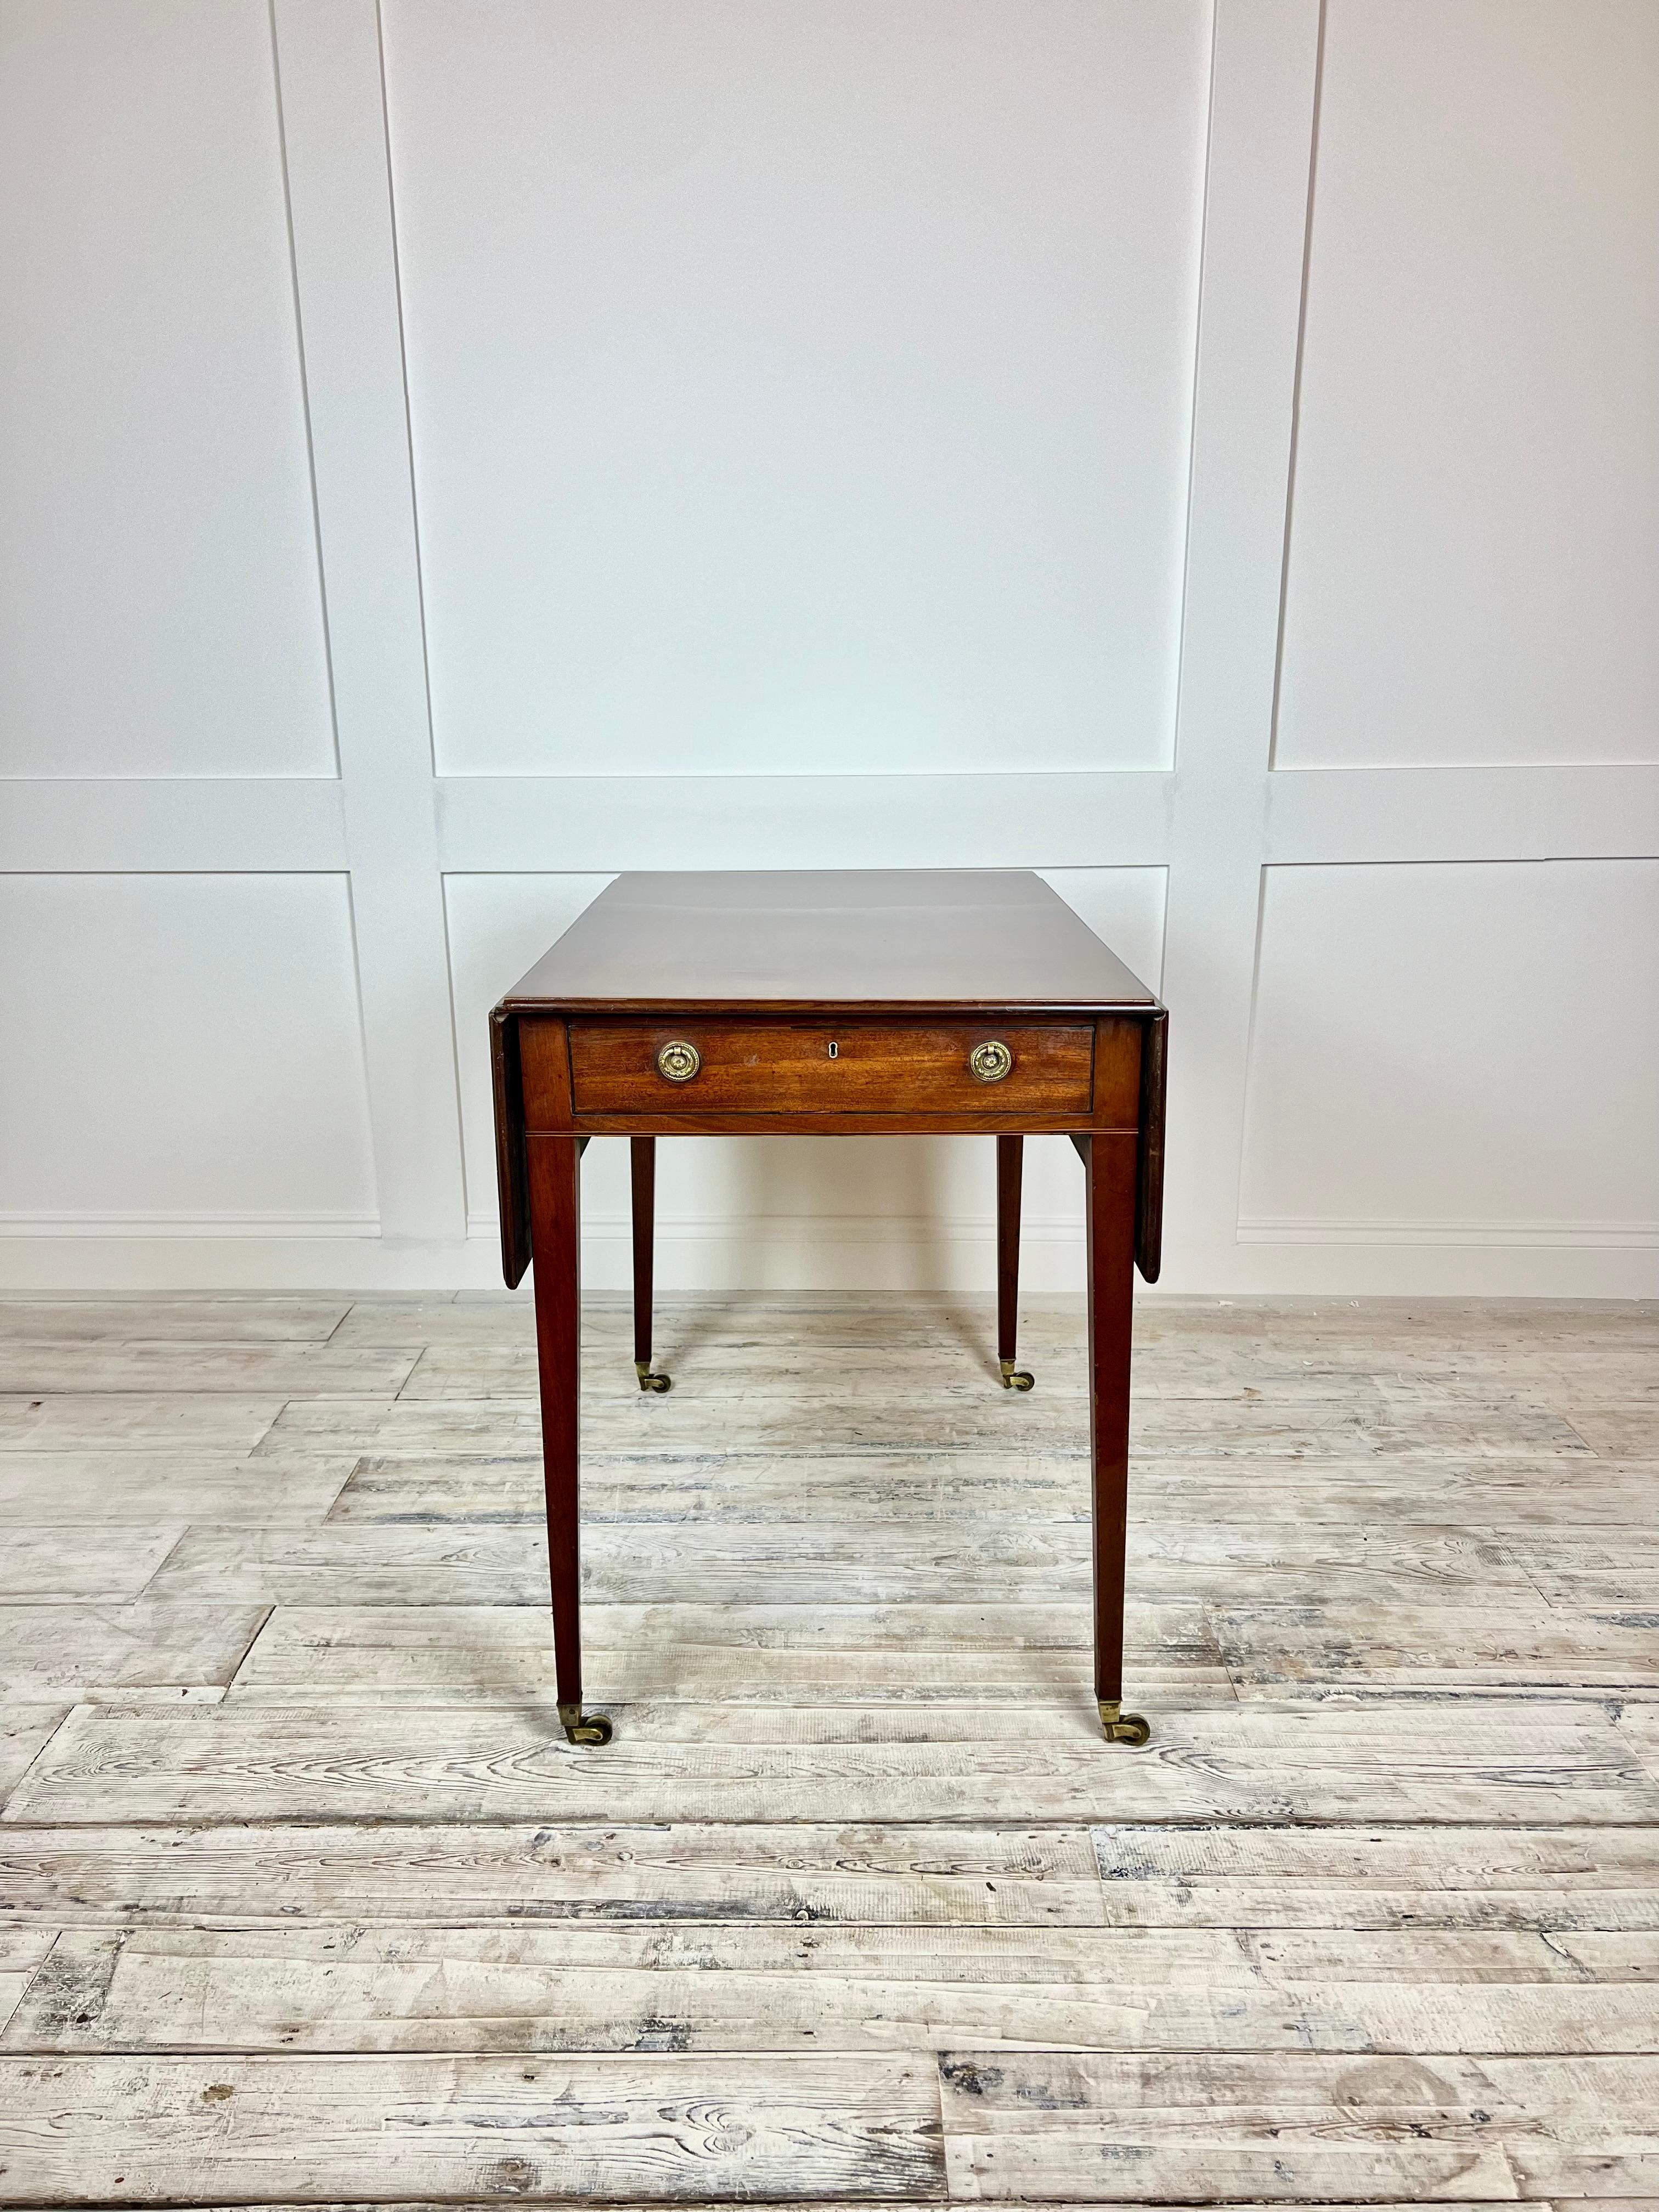 A delightful example of Regency drop leaf Mahogany table, dating back to the early 1800's. This table is crafted of a rich Mahogany and polished finish with elegant late Regency-style Tapering legs with original Brass castors. This table as a rich